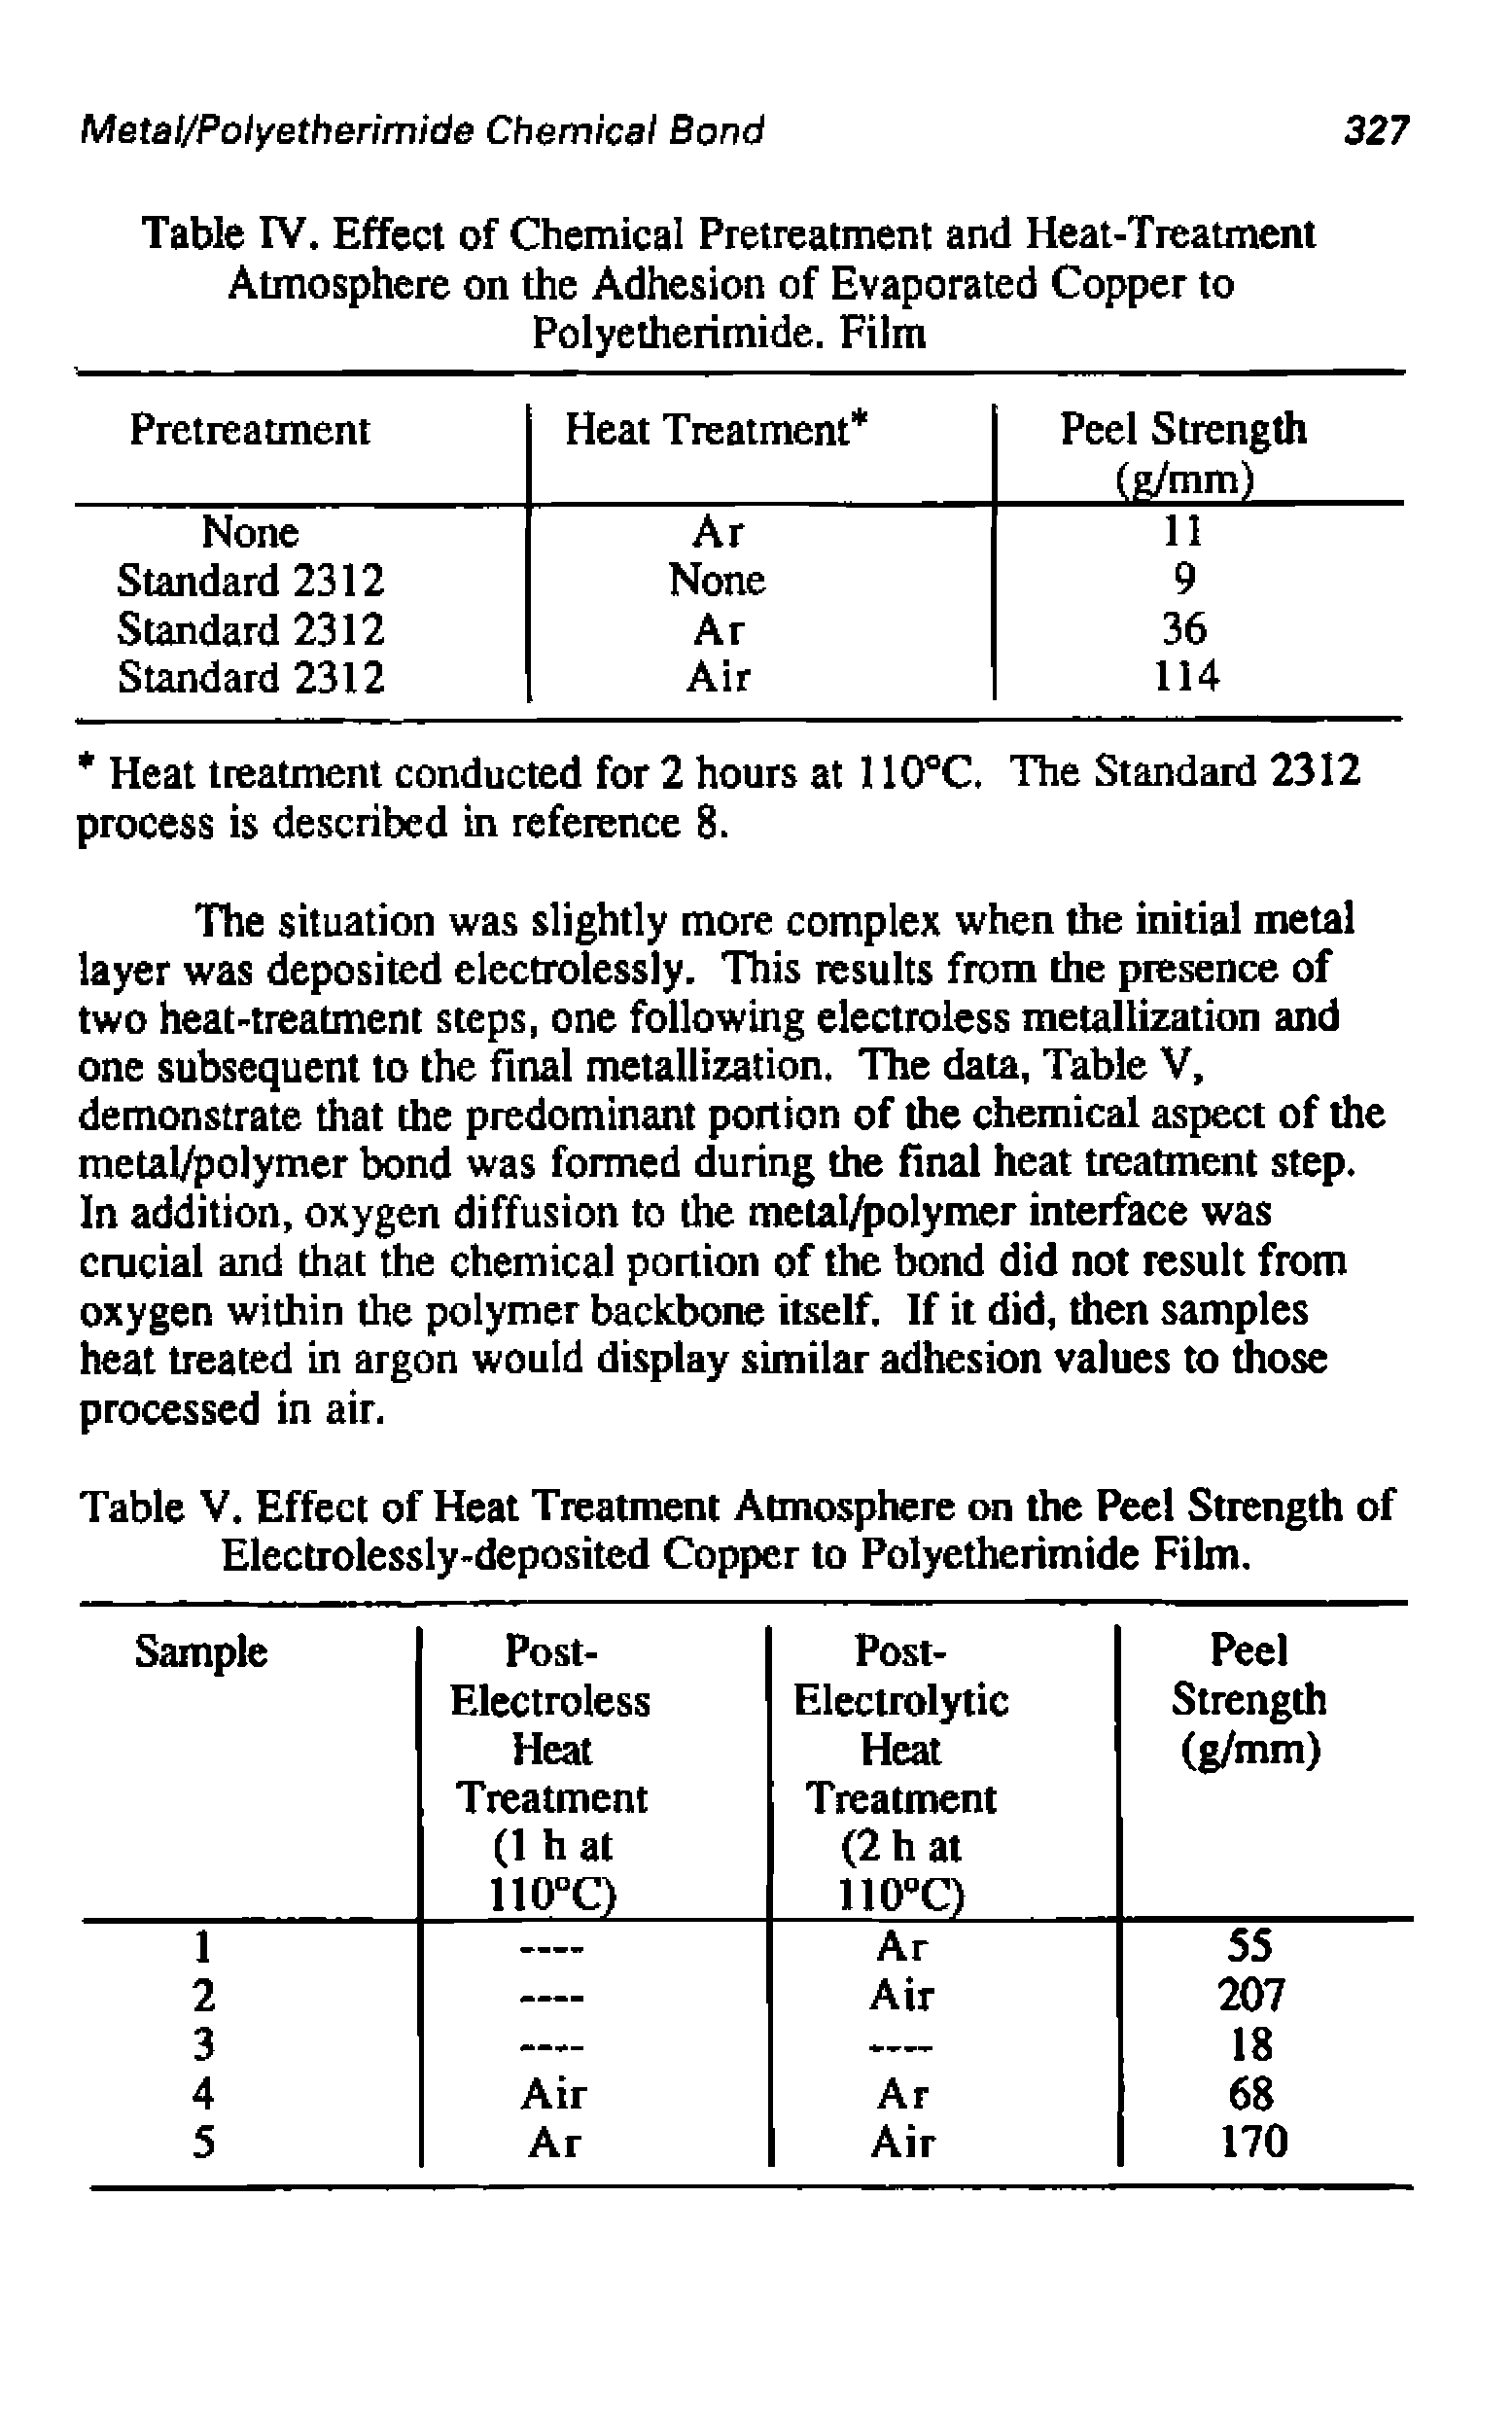 Table V. Effect of Heat Treatment Atmosphere on the Peel Strength of Electrolessly-deposited Copper to Polyetherimide Film.